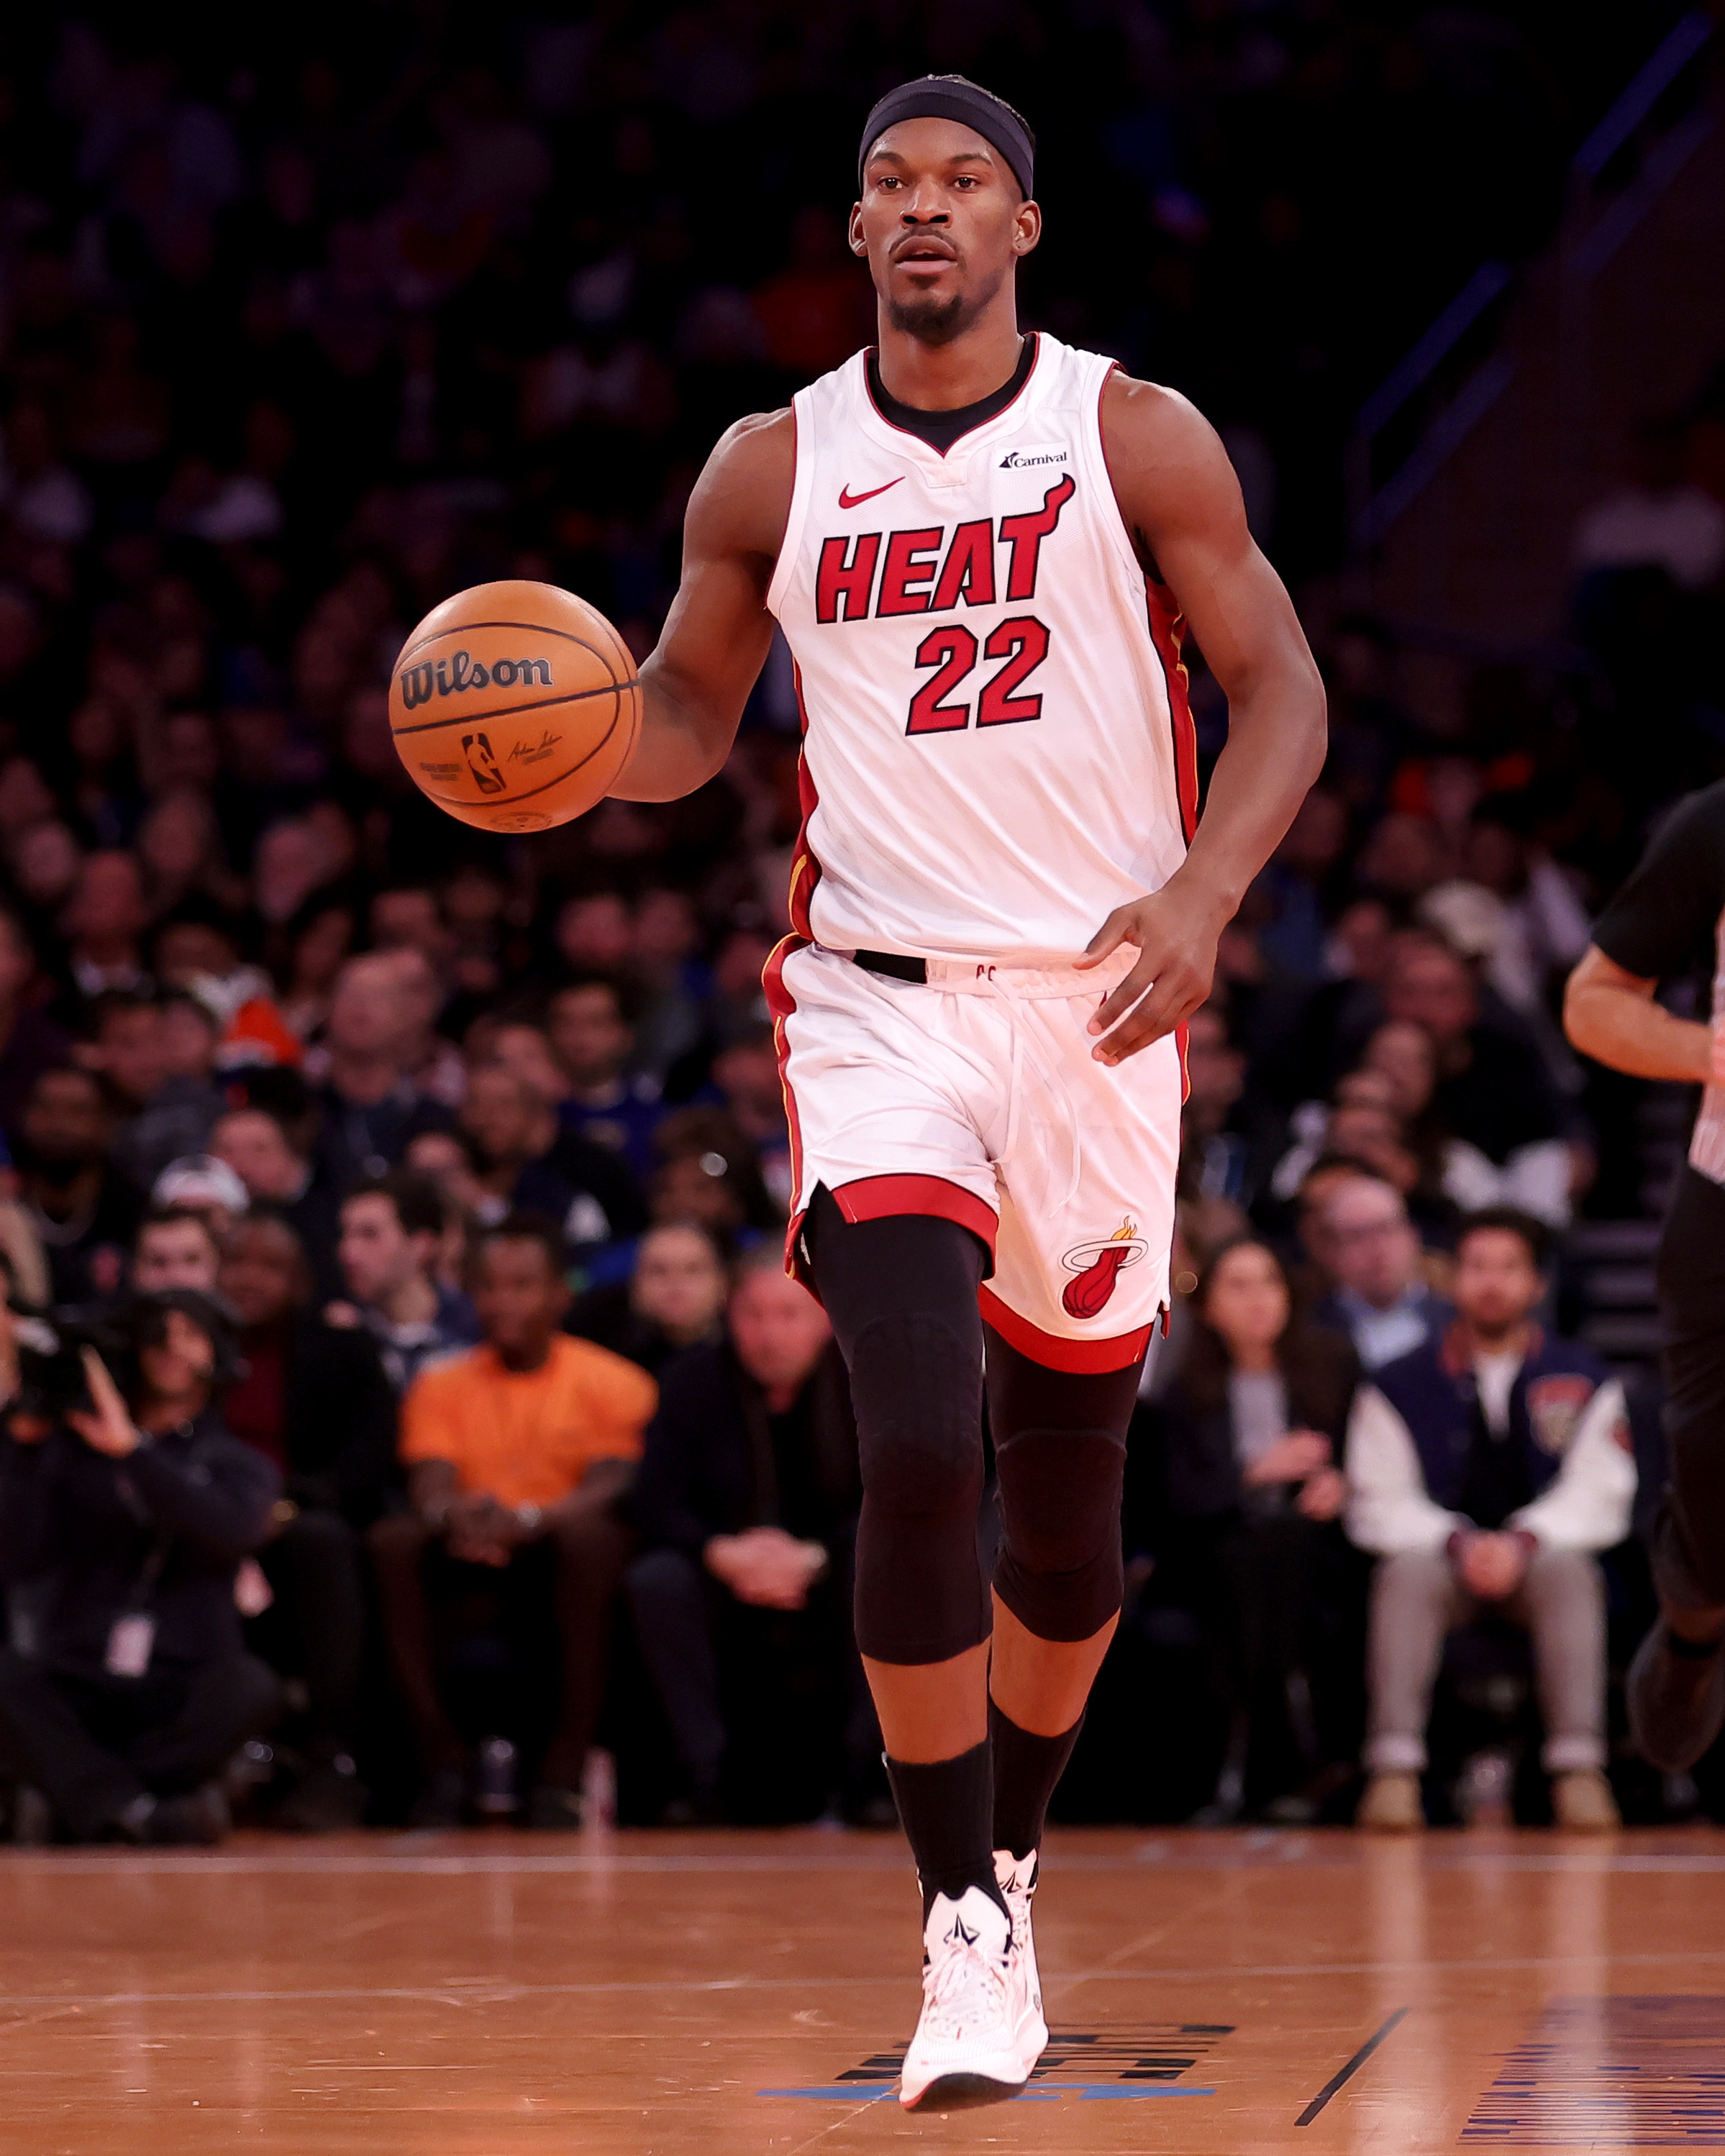 Knicks pull off late comeback for win over Heat | Reuters